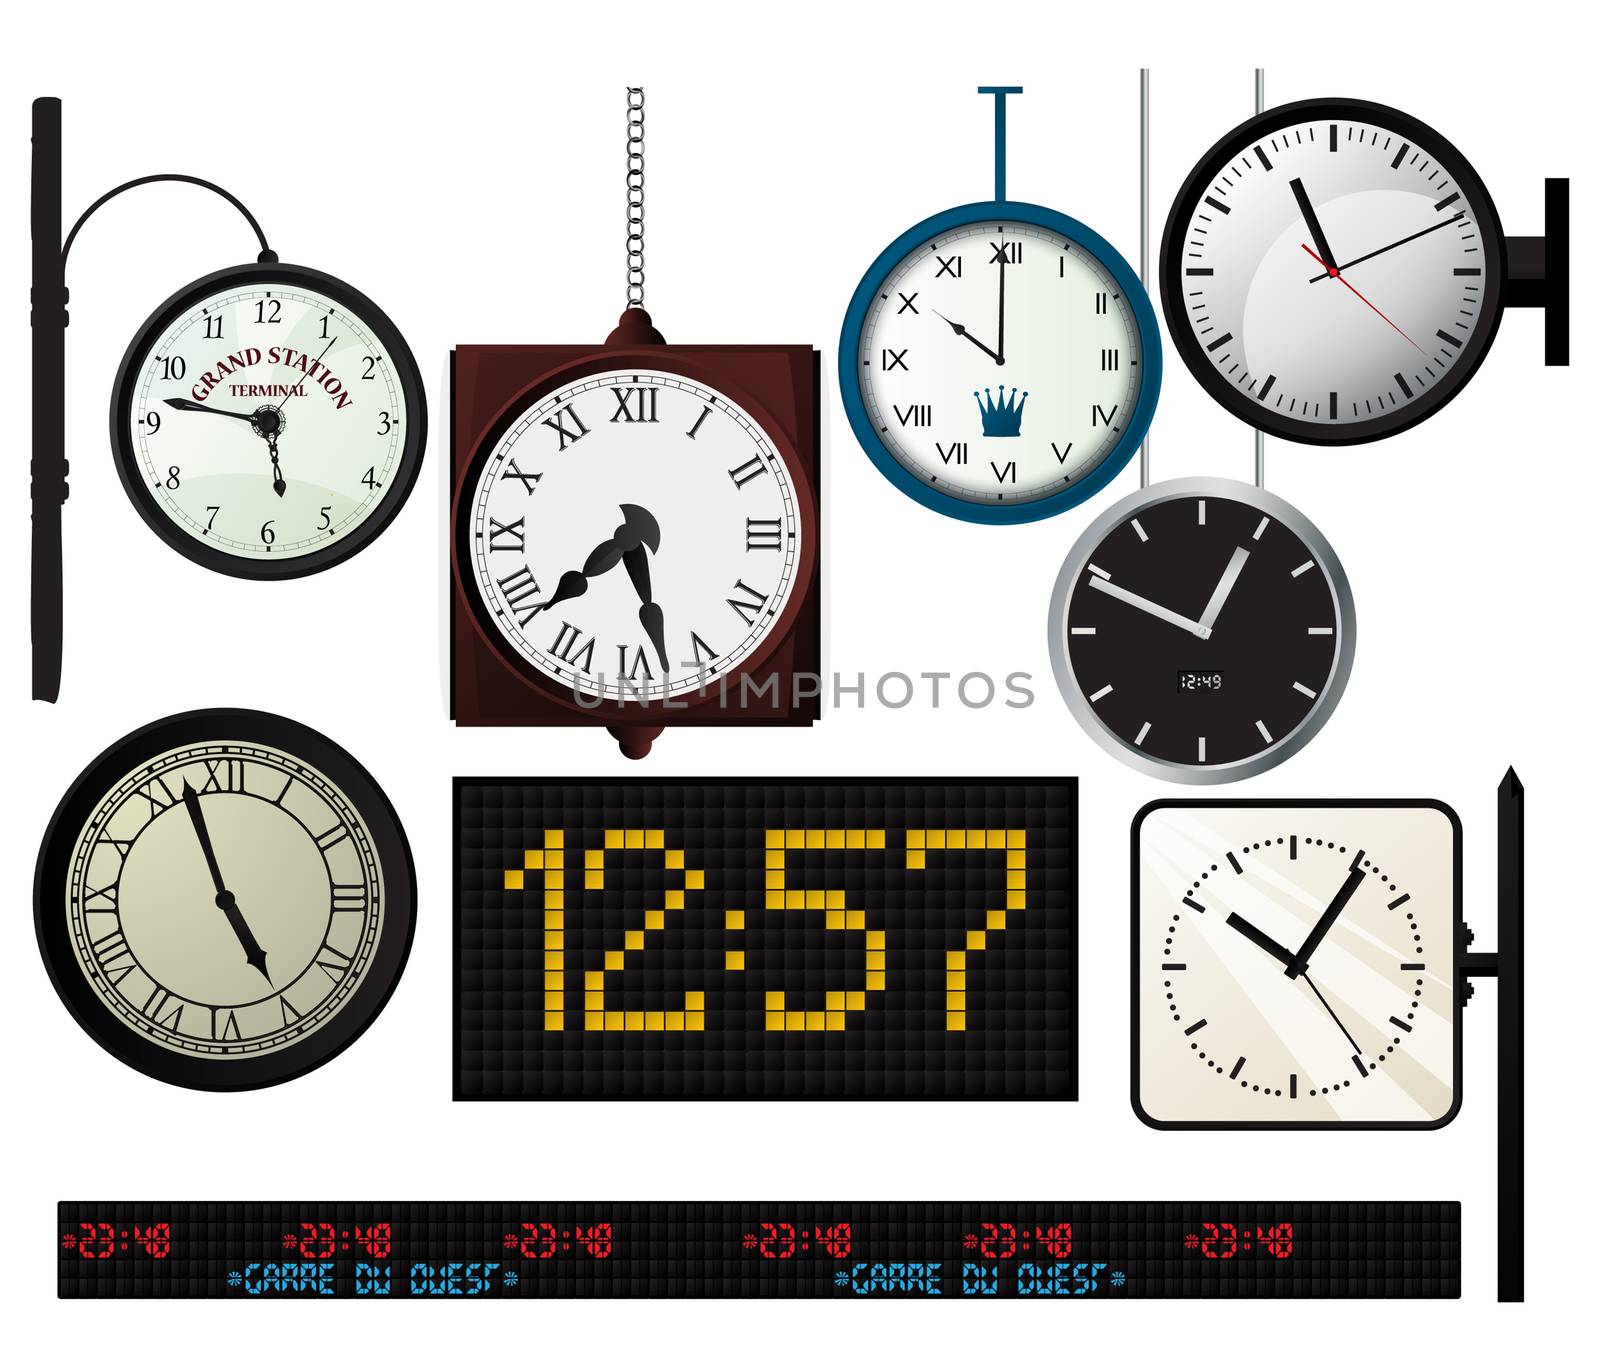 Train station watches collection by Lirch